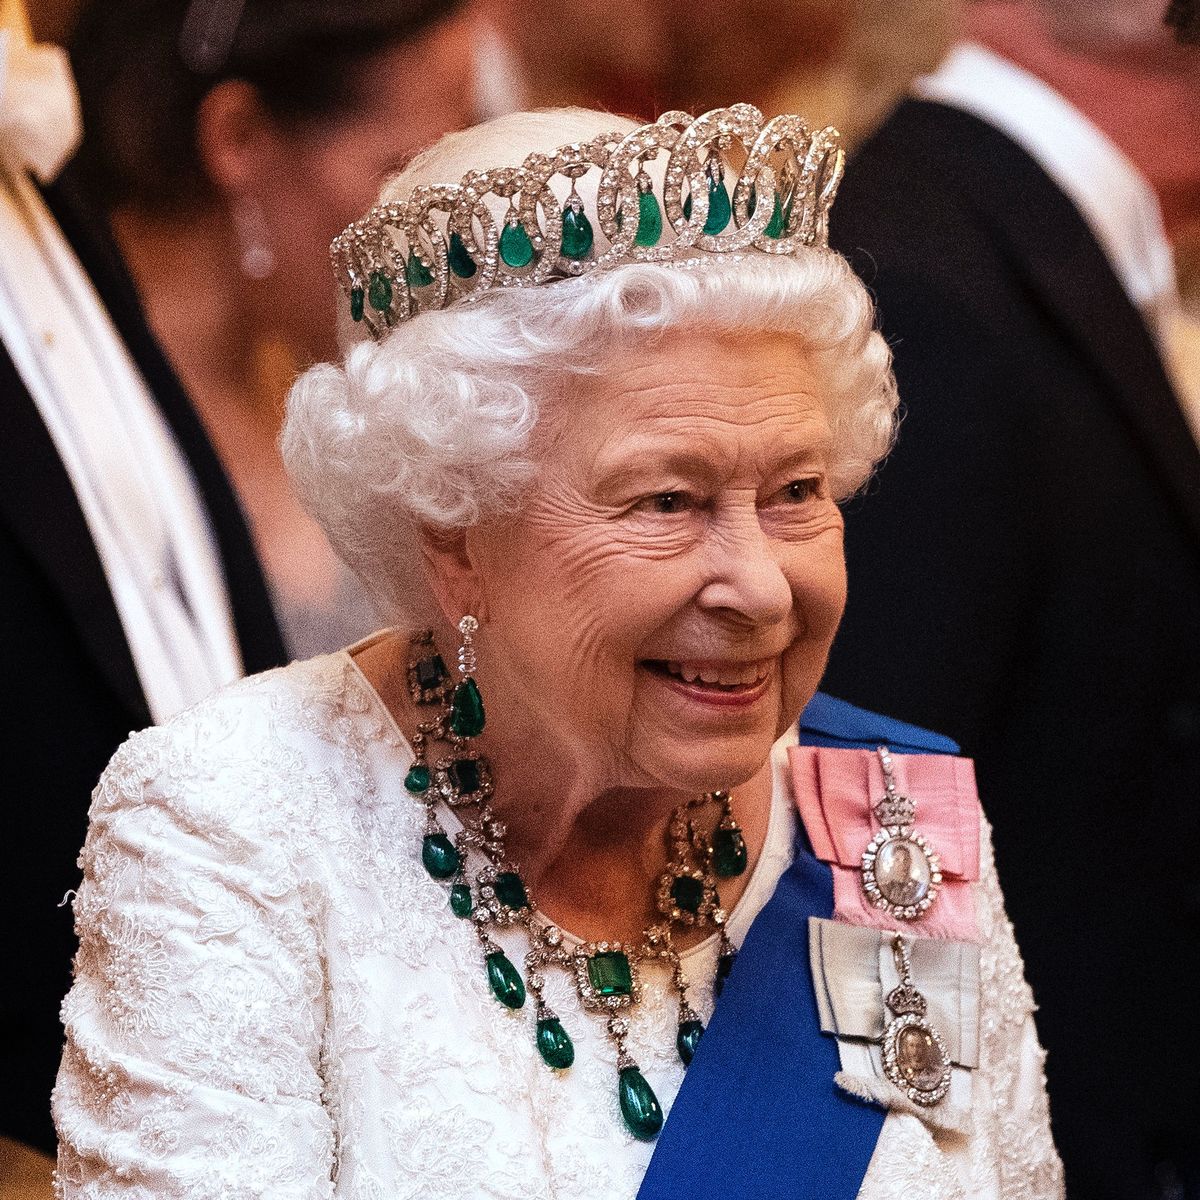 Queen Elizabeth II talks to guests at an evening reception for members of the Diplomatic Corps at Buckingham Palace on December 11, 2019 in London, England.